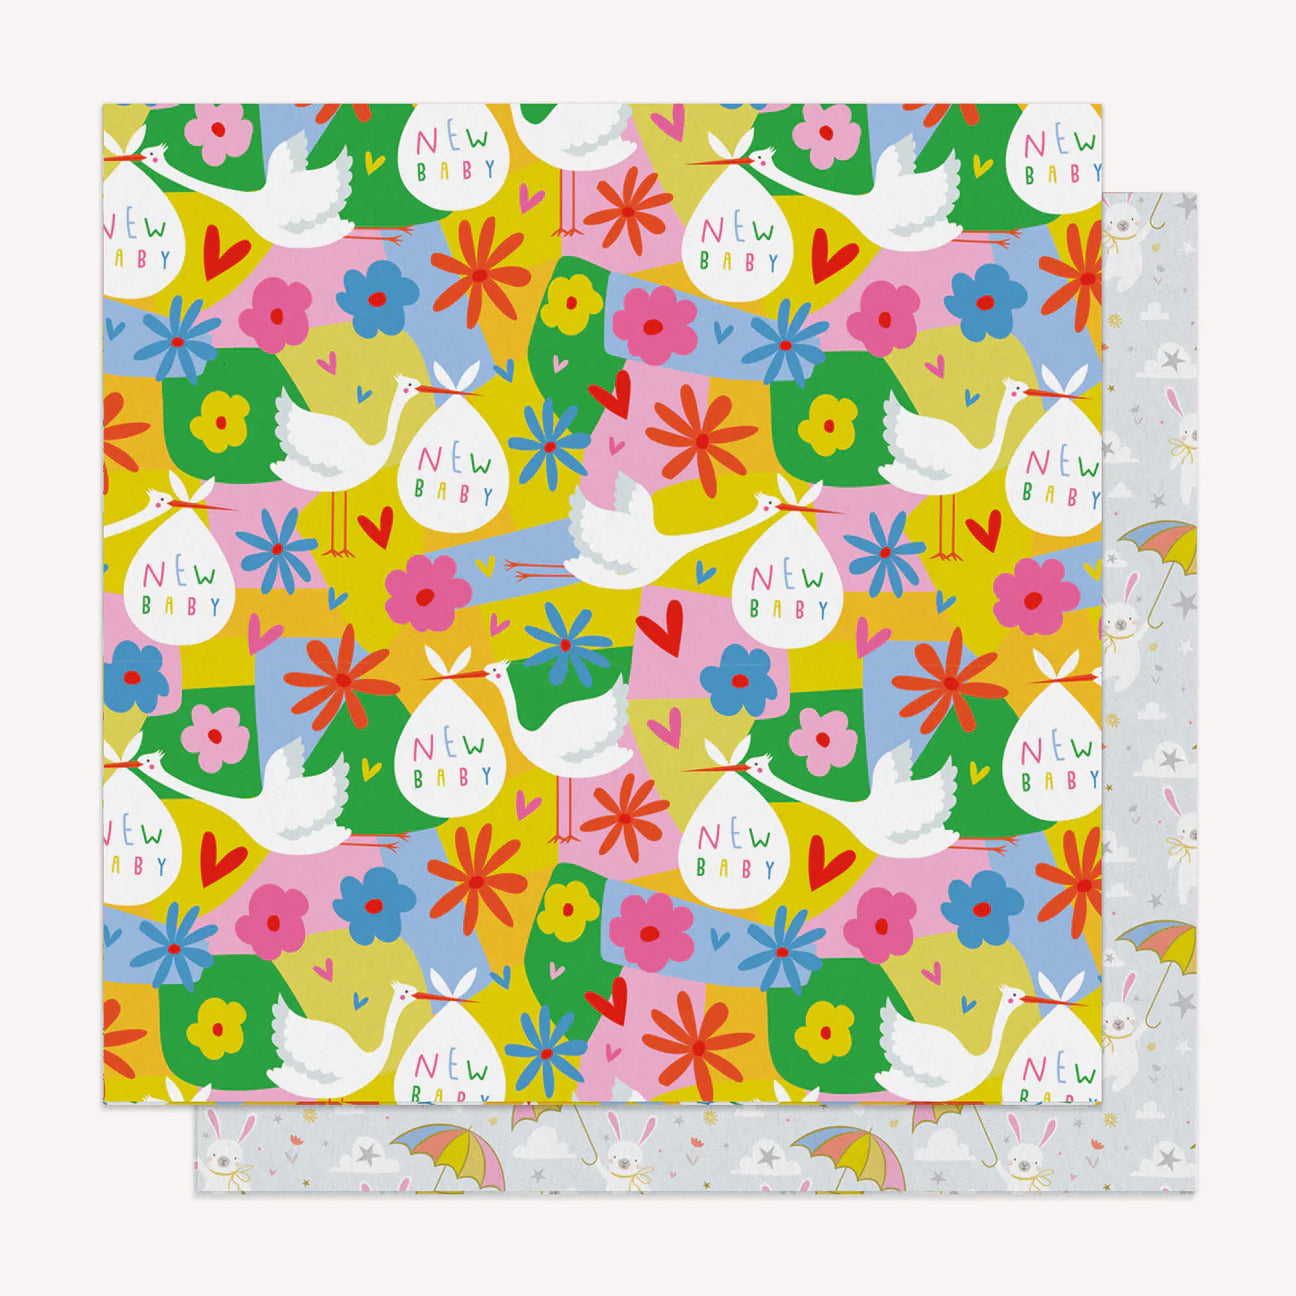 FLAT SHEET WRAPPING PAPER BUNNY AND STORK